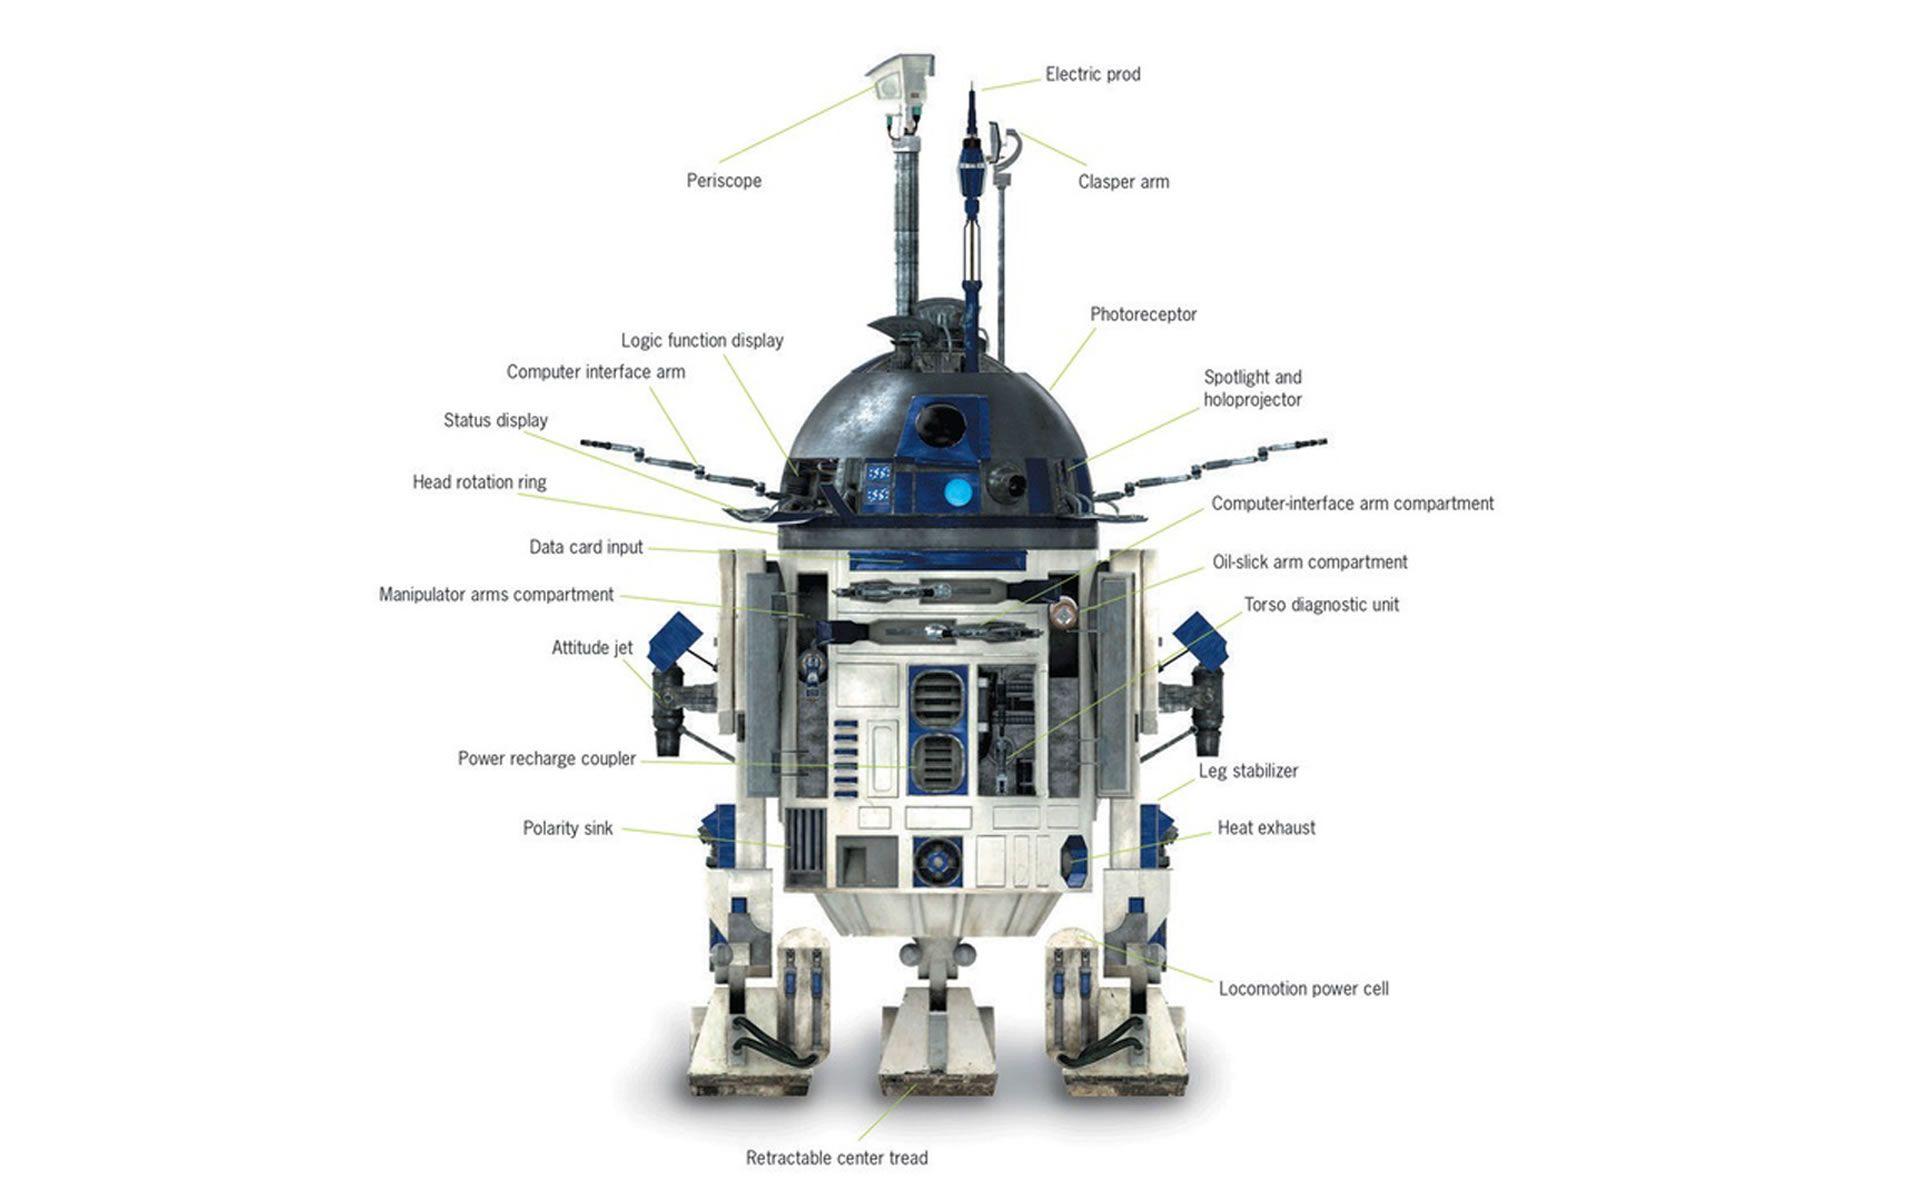 Related Picture Star Wars R2d2 iPhone HD Wallpaper Lowrider Car